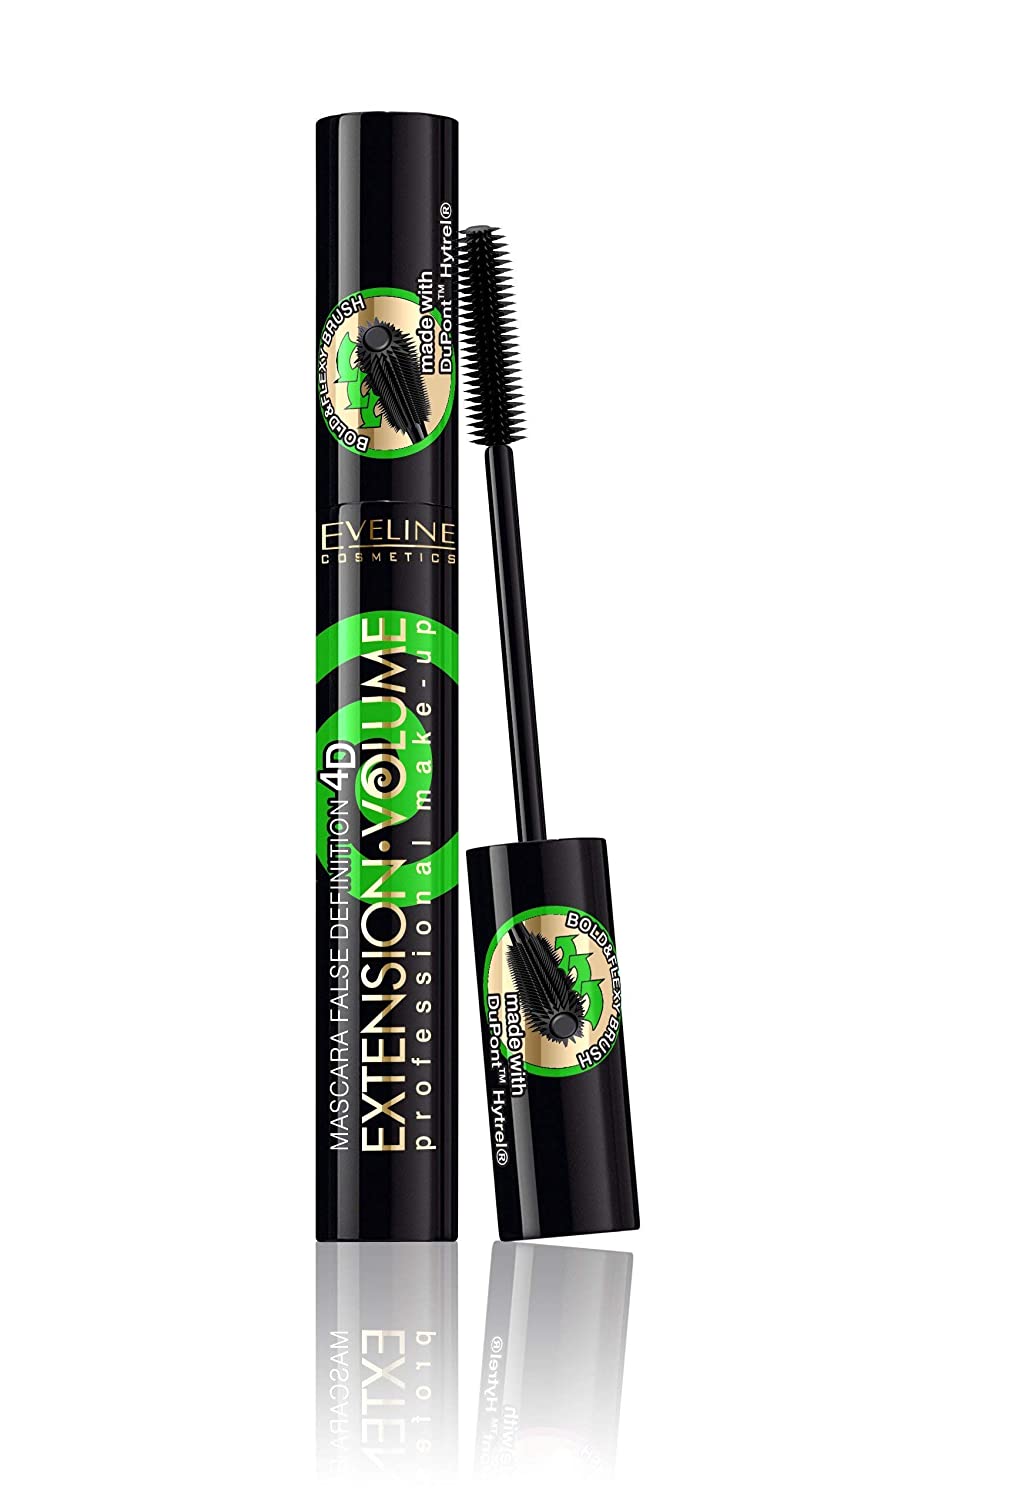 Eveline Cosmetics Extension Volume 4D Mascara Extreme Lengthening and Curl